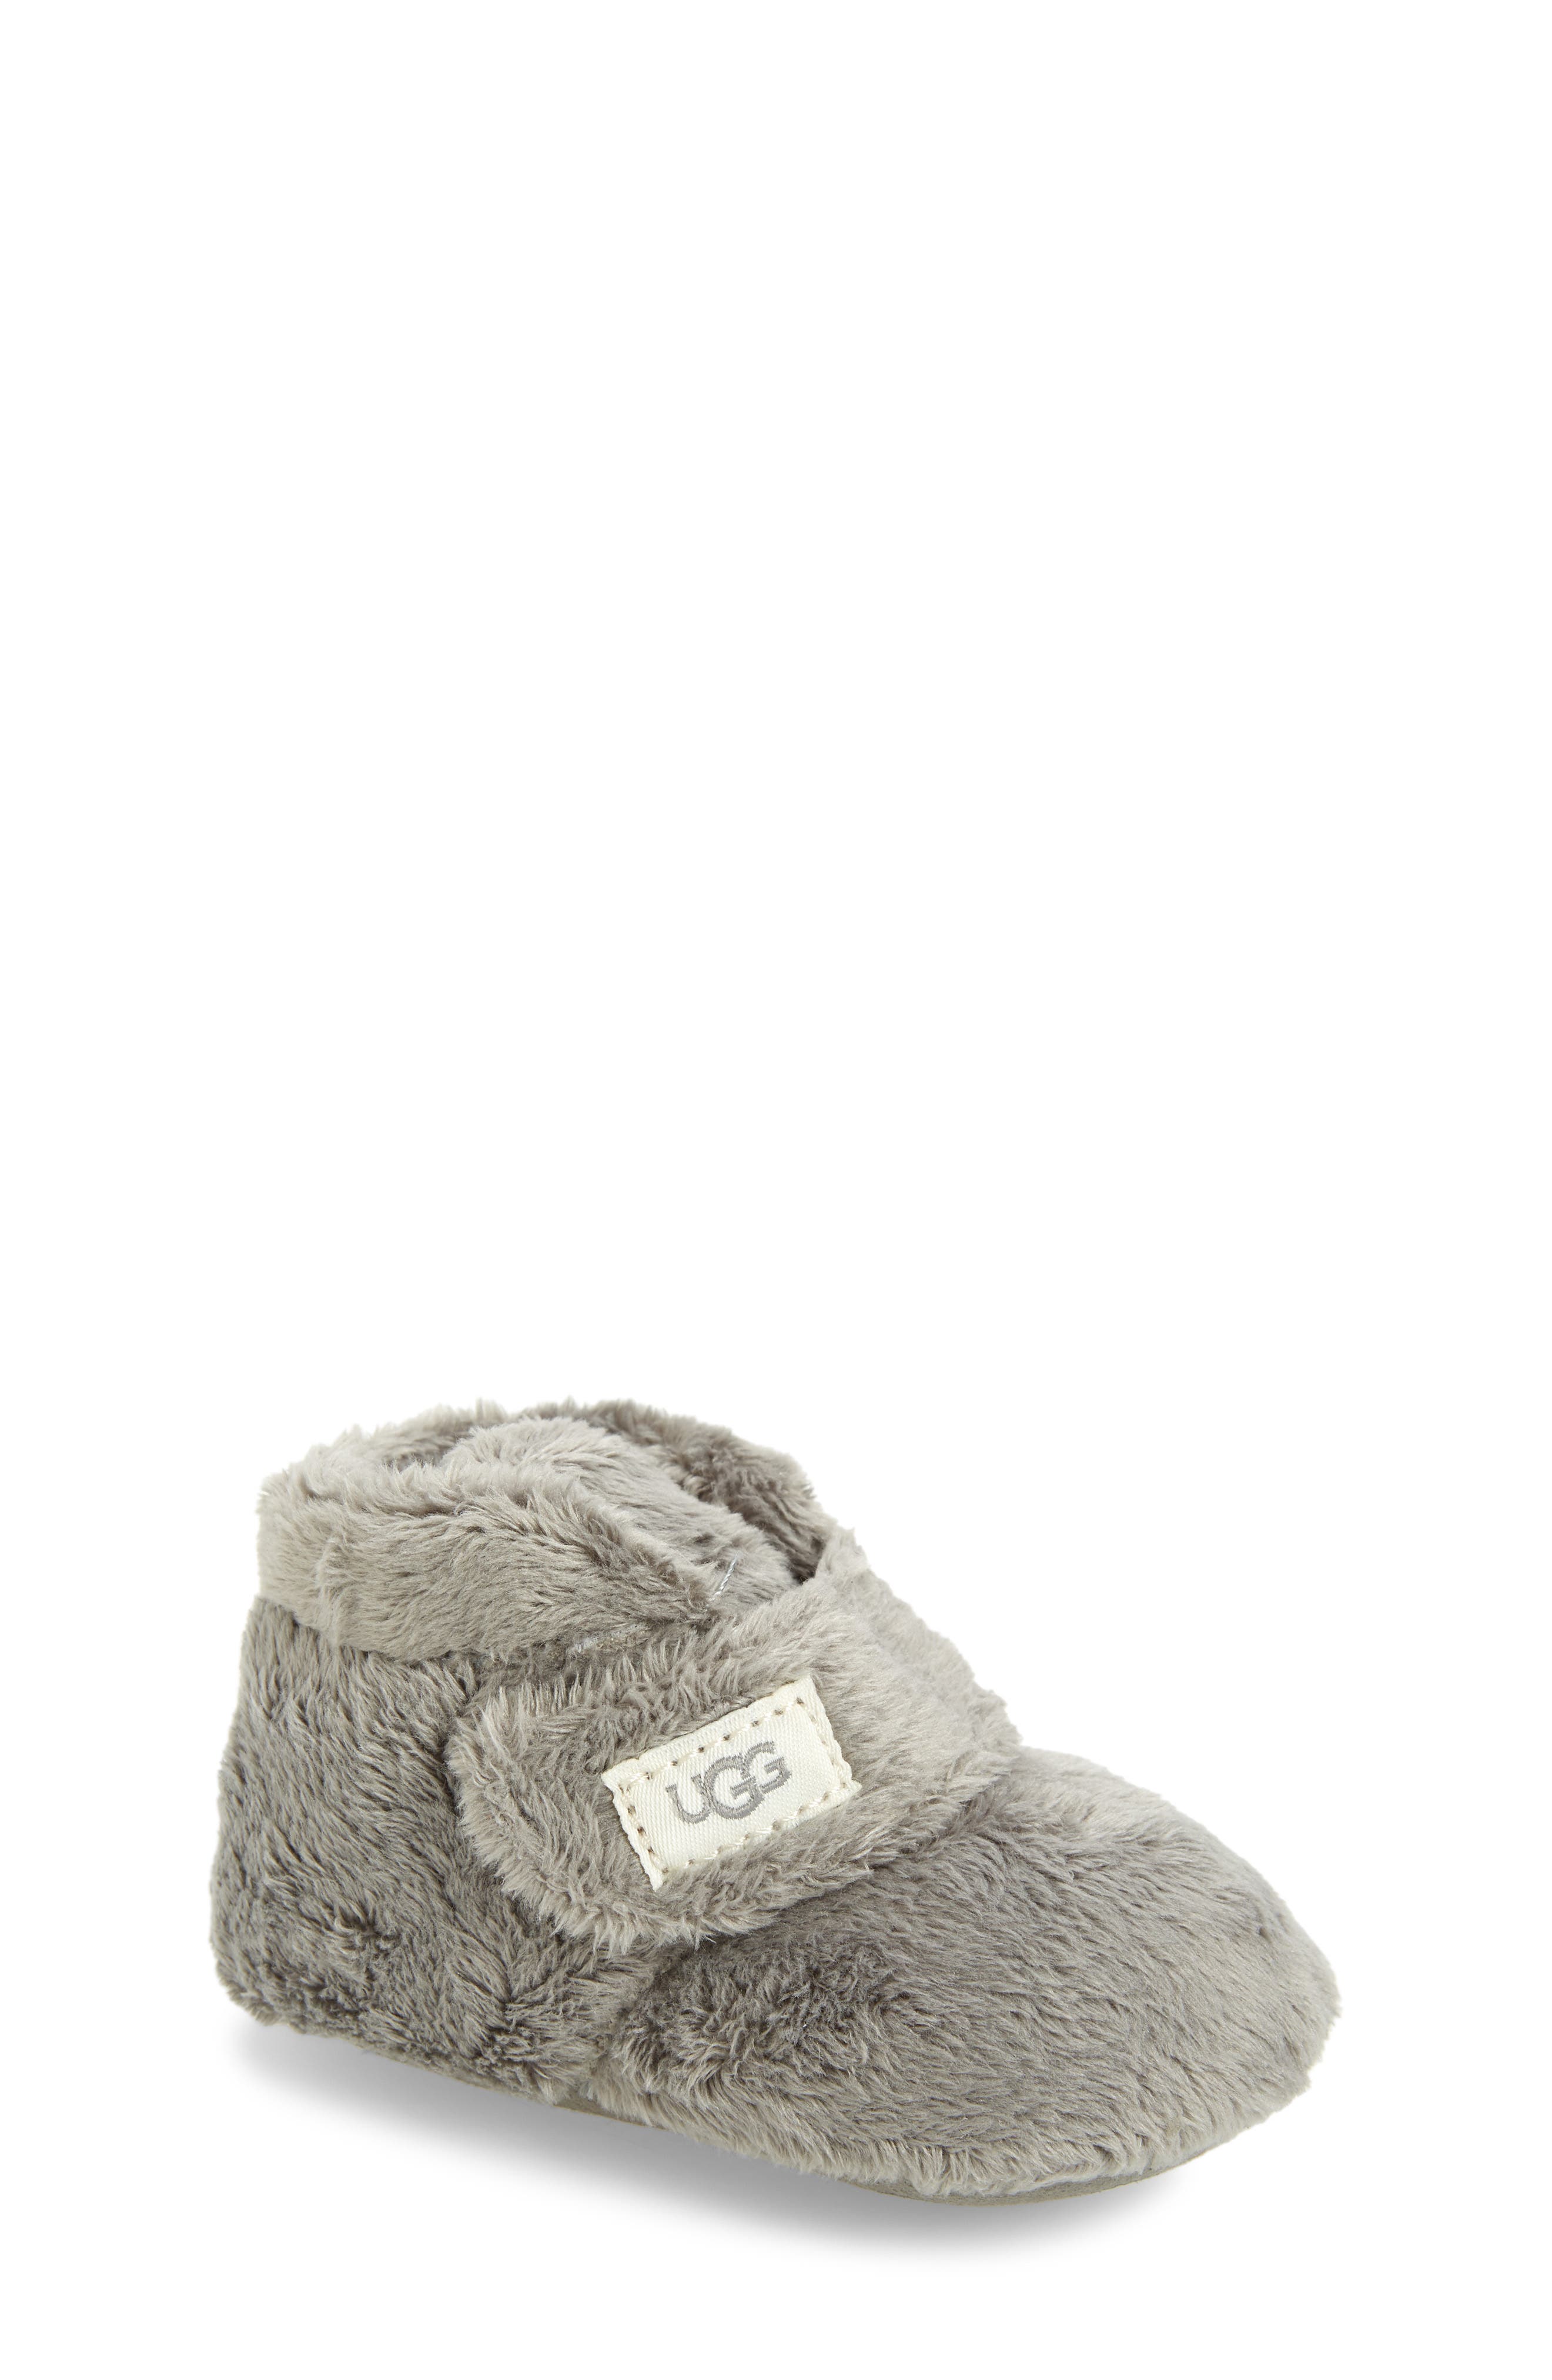 Fox Box One Shoes Boys Shoes Booties & Cot Shoes 